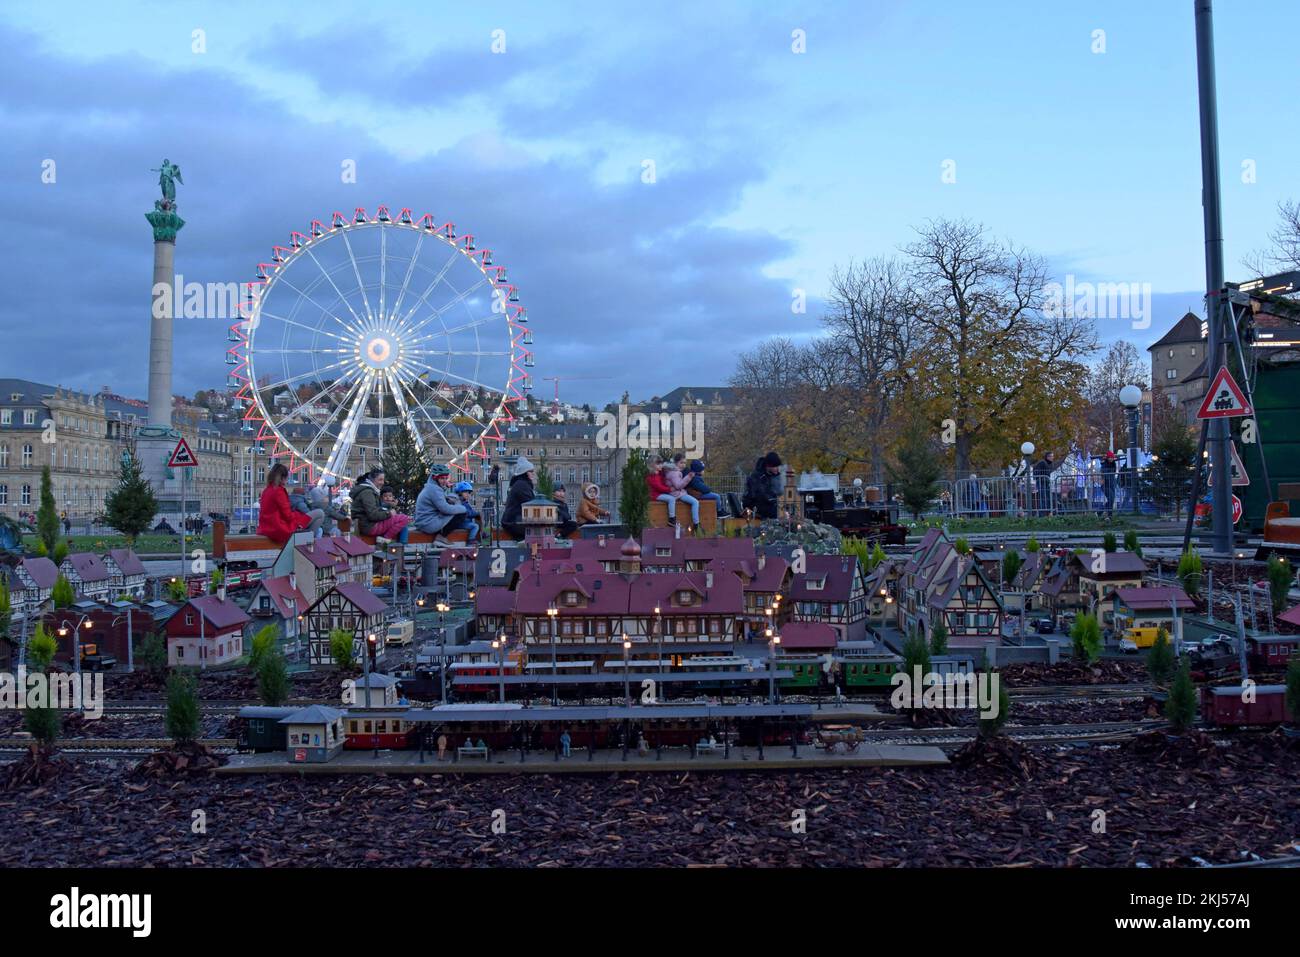 Stuttgart, Germany, 24th November 2022. People enjoying a ride on a miniature steam locomotive at Stuttgart Christmas Market. The market, with 200 illuminated and decorated stalls, a fairground and miniature railway display is open every day until 23rd December. G.P.Essex/Alamy Live News Stock Photo